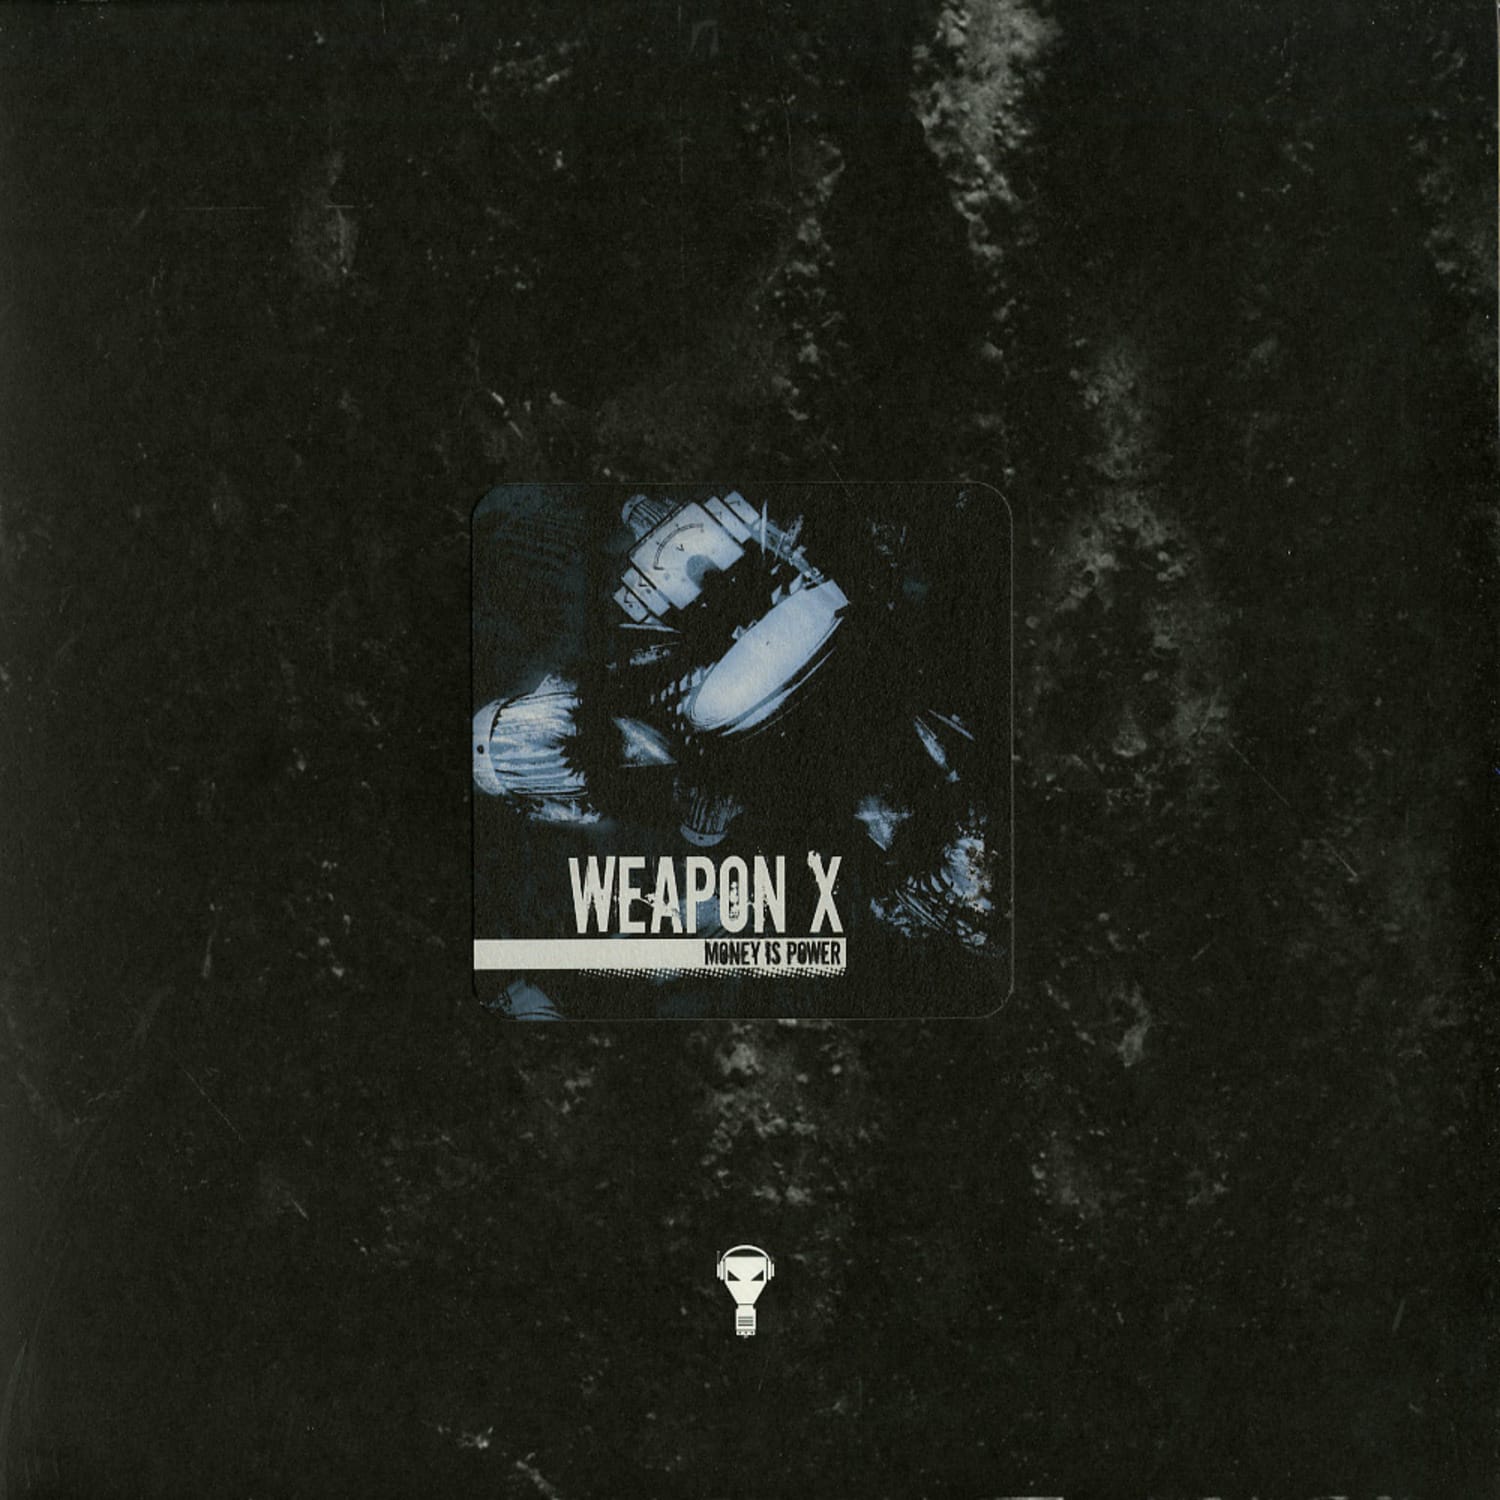 Weapon X - MONEY IS POWER